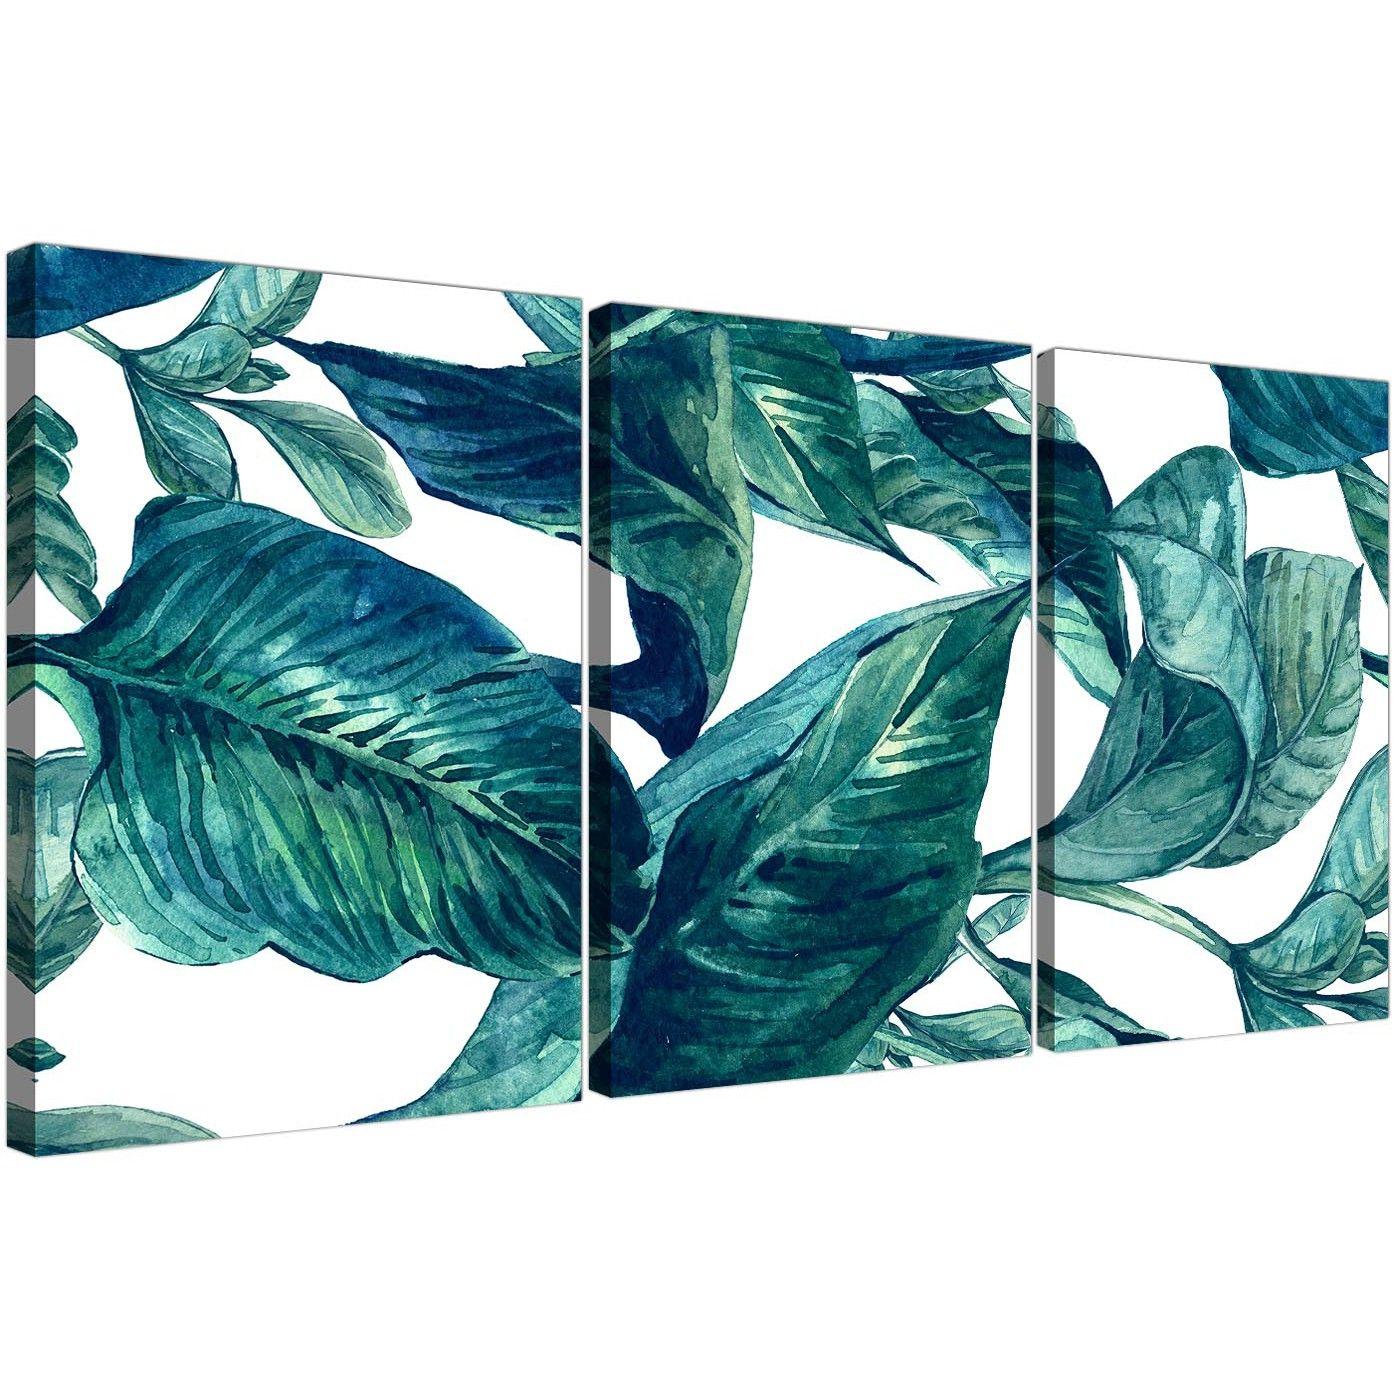 Blue and Green Leaf Logo - Teal Blue Green Tropical Exotic Leaves Canvas Wall Art Print